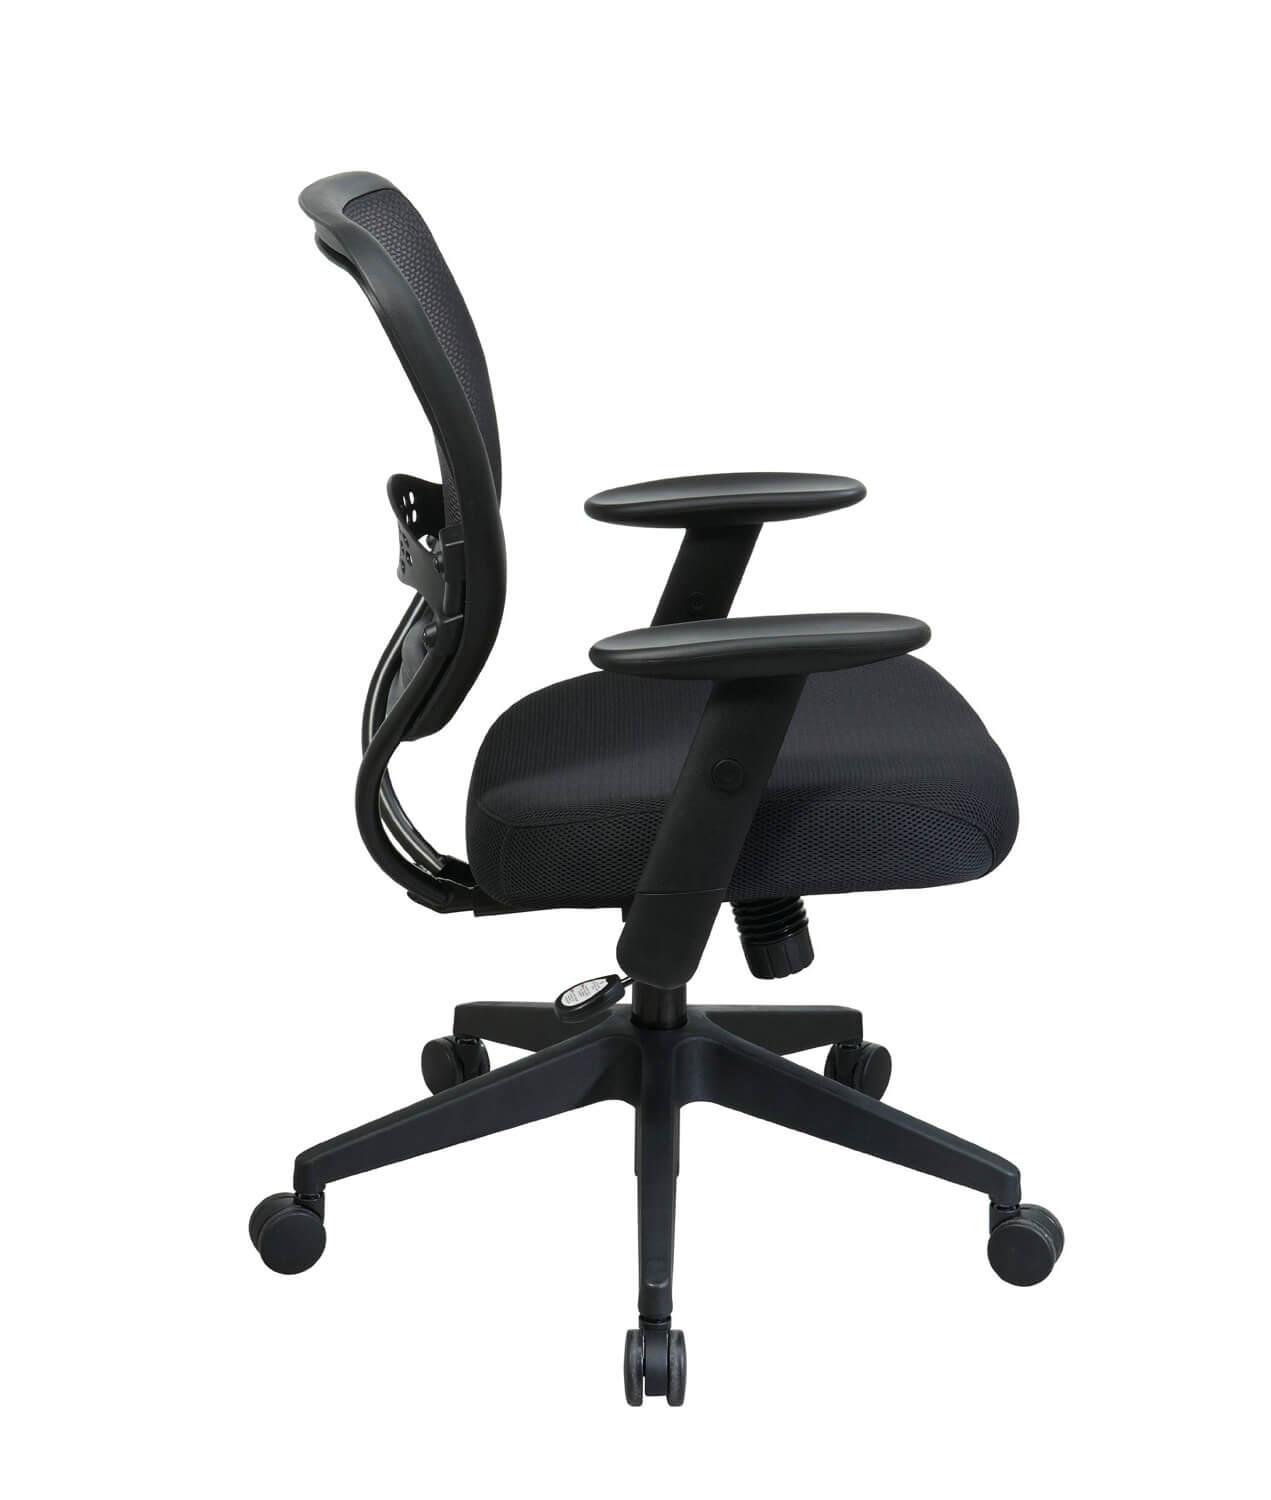 used office chairs - Second Hand Office Chairs - Used Office Furniture